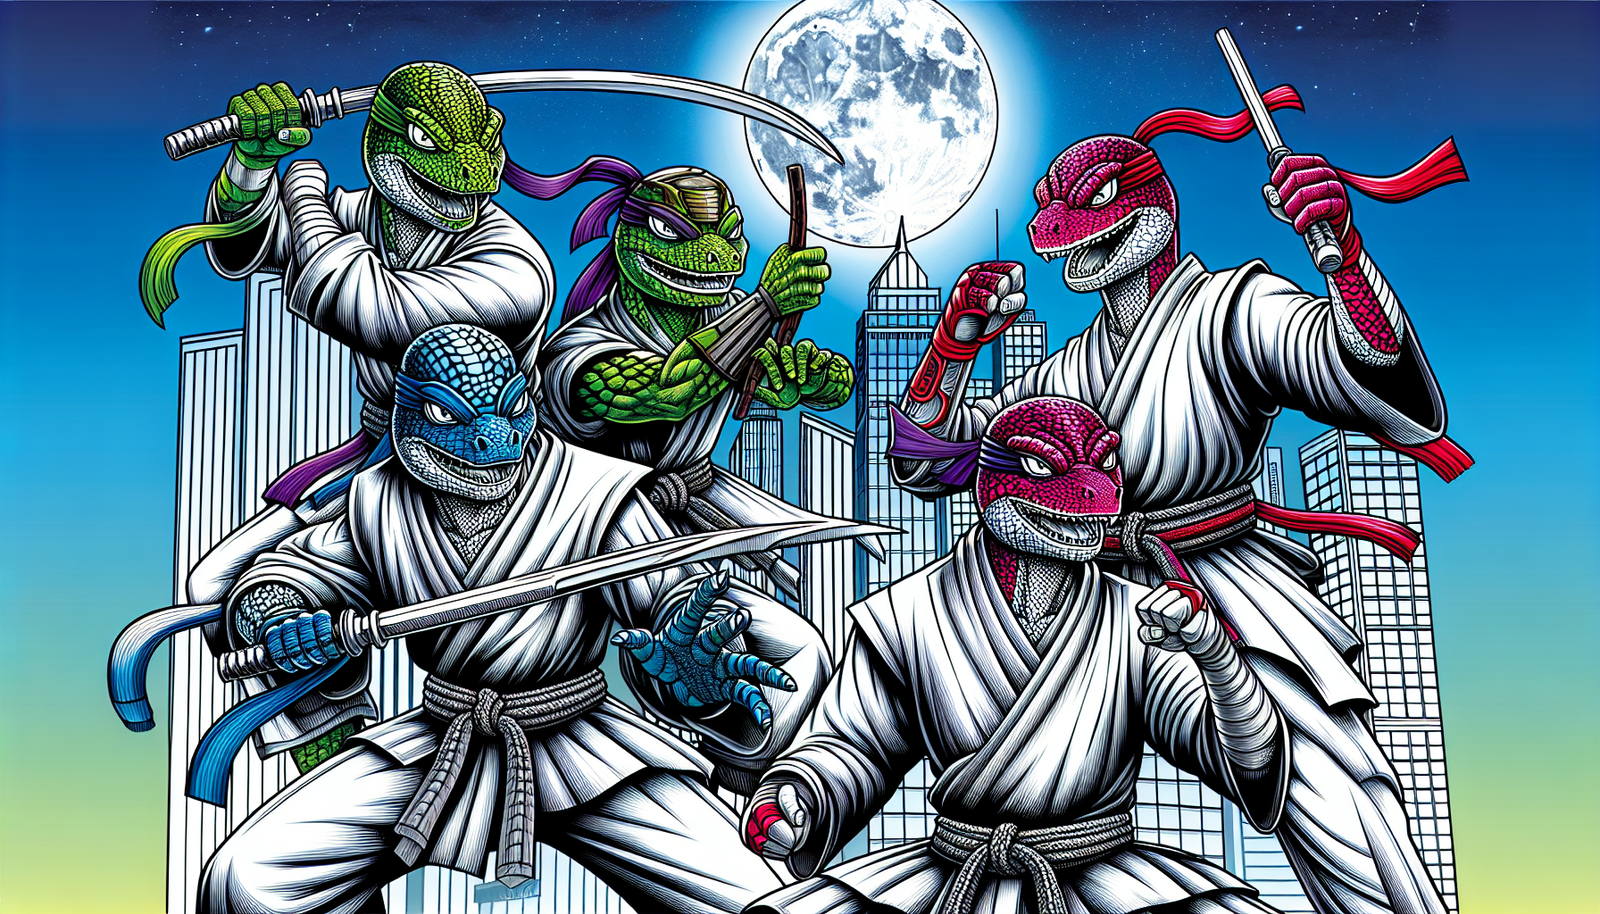 Discounted Anime-Style Coloring Book with Ninja Turtles